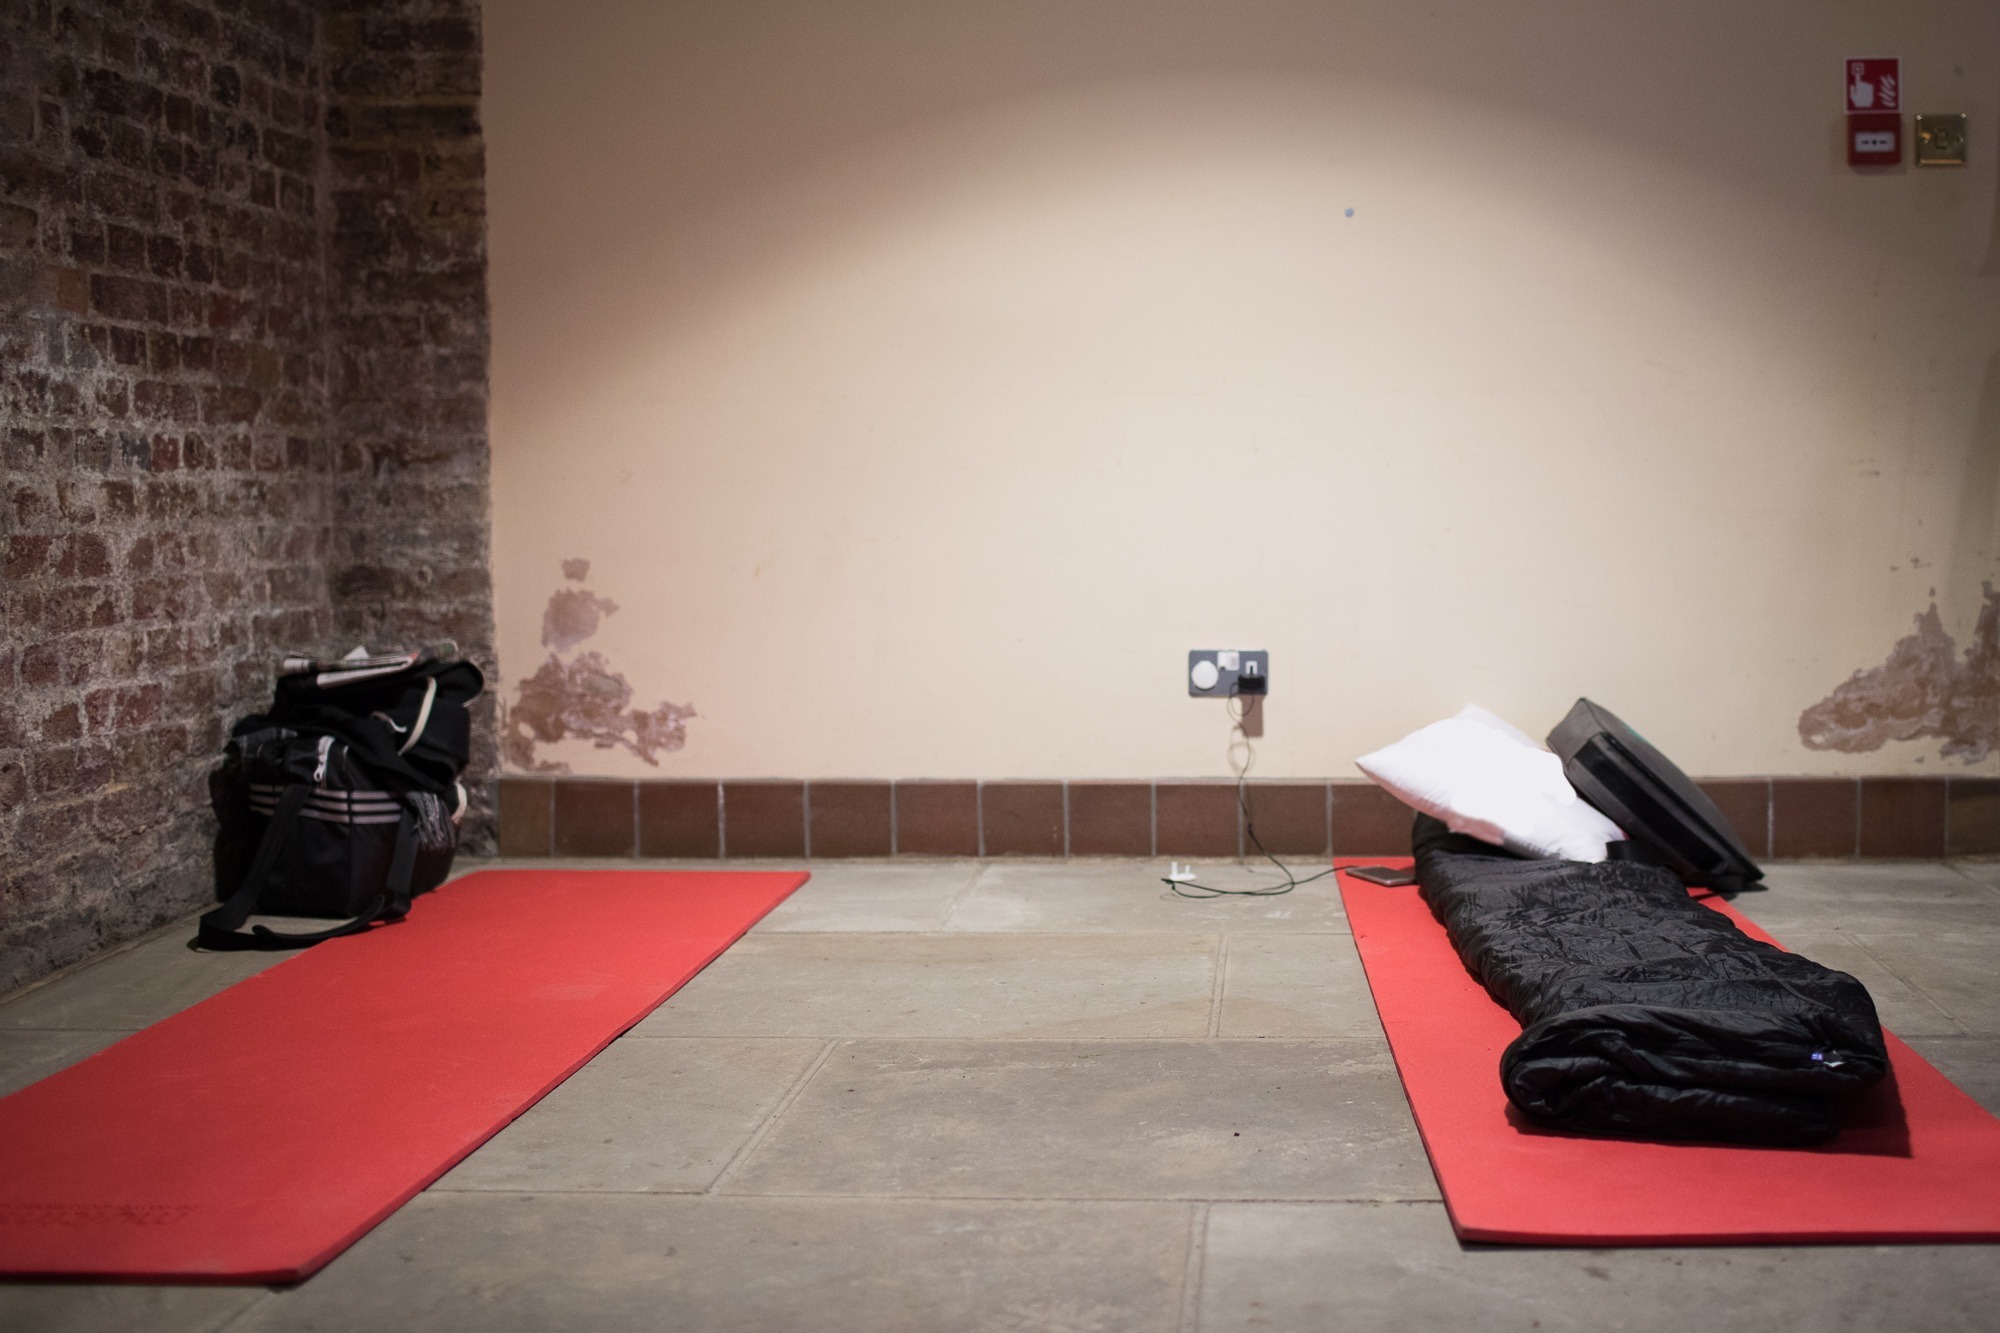 Example of a Night Shelter sleeping space